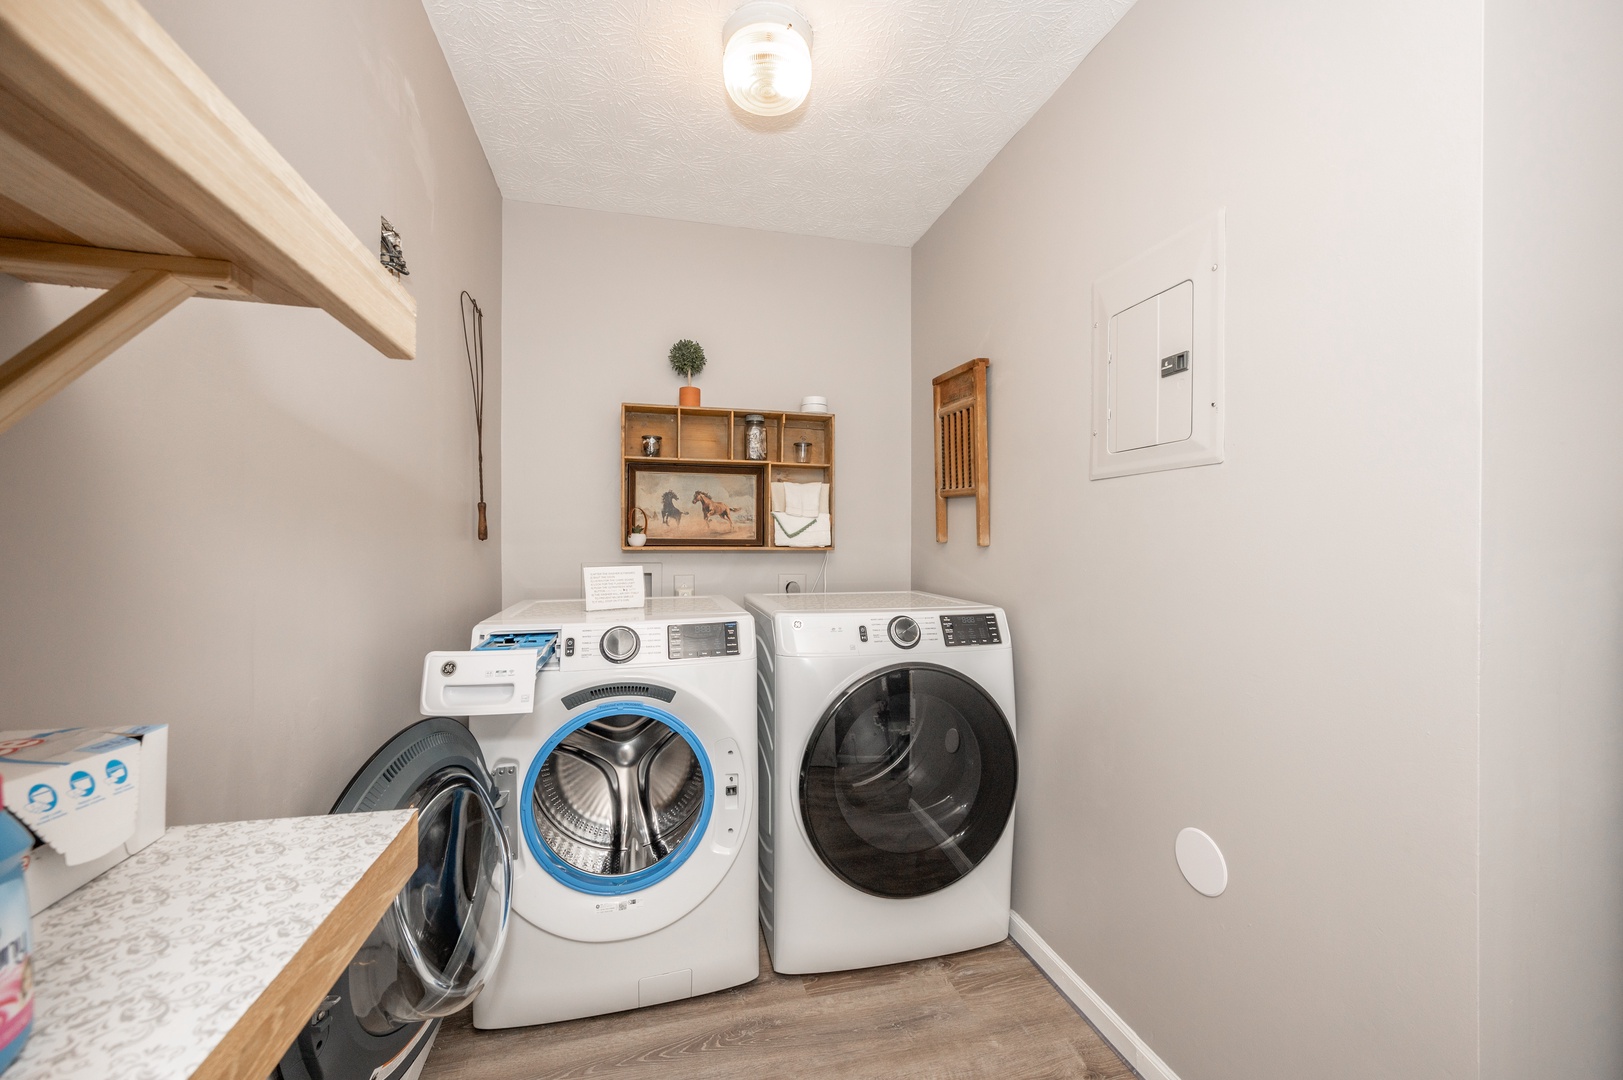 Private laundry is available for your stay, tucked away in a laundry room